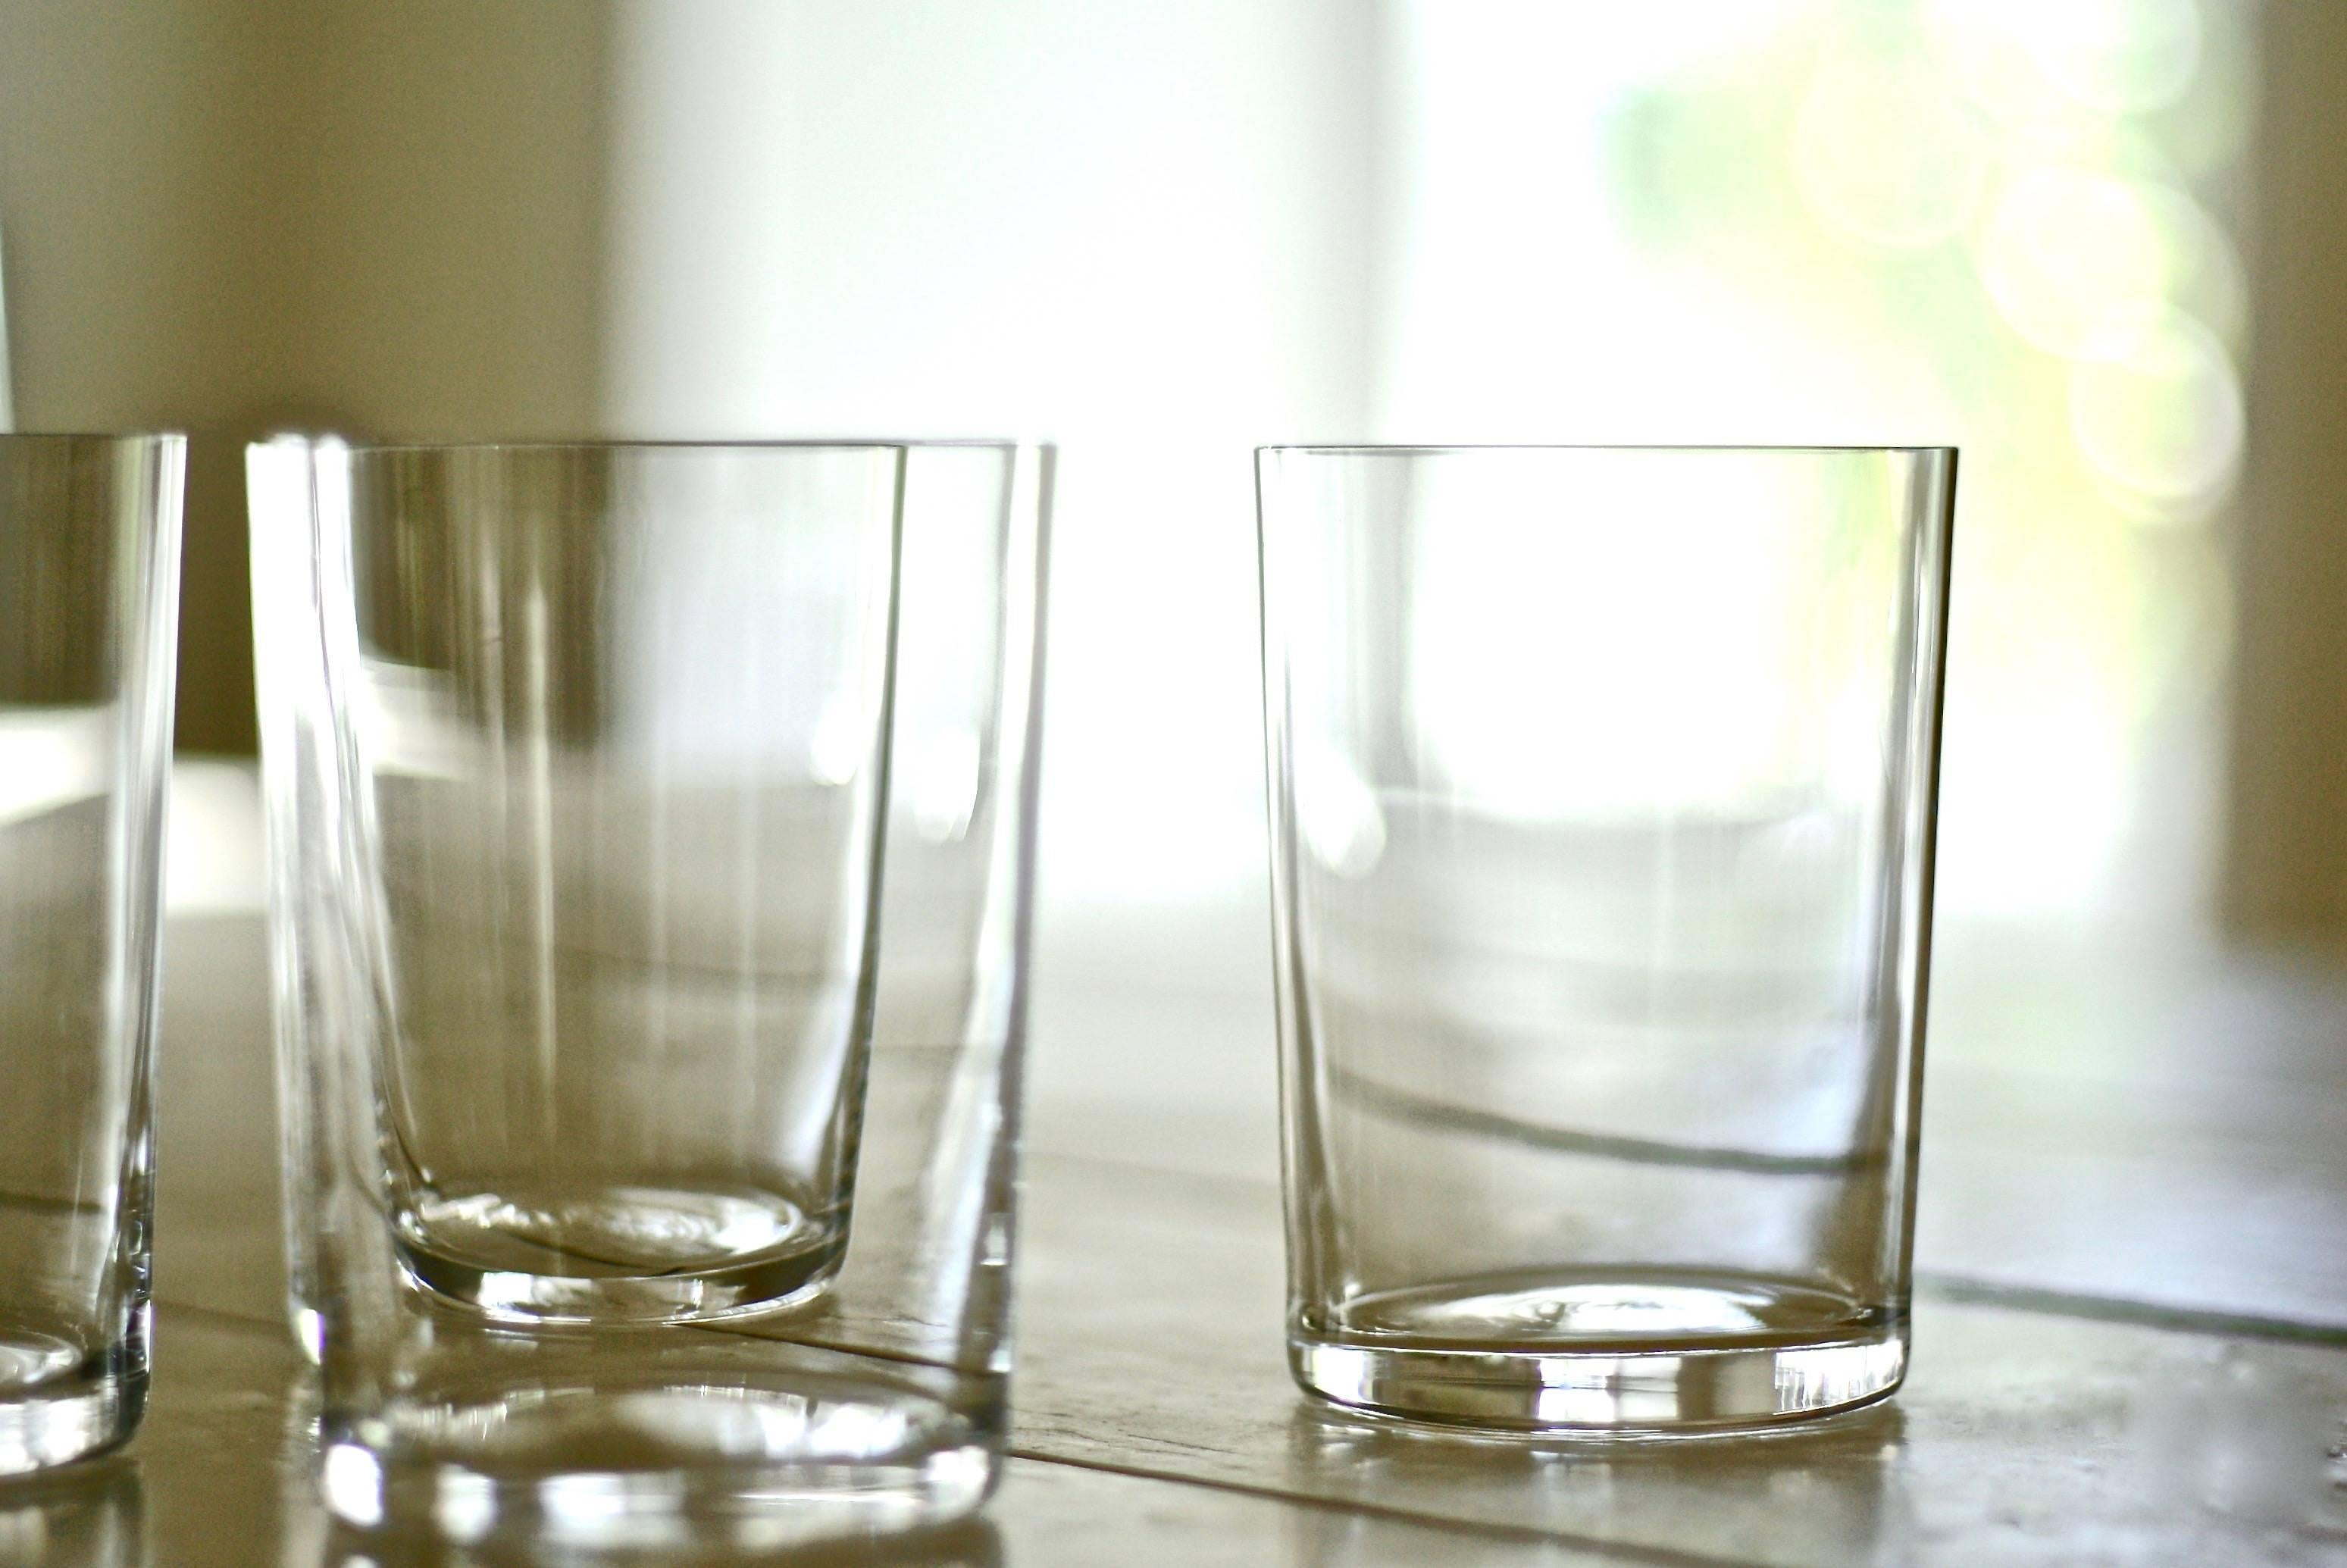 Launched with Takashimaya in 1999, these hand blown crystal water glasses have become a modern Classic. Each Deborah Ehrlich piece is designed for the extraordinary strength and clarity of Swedish crystal. The simplicity of the design, the thinness